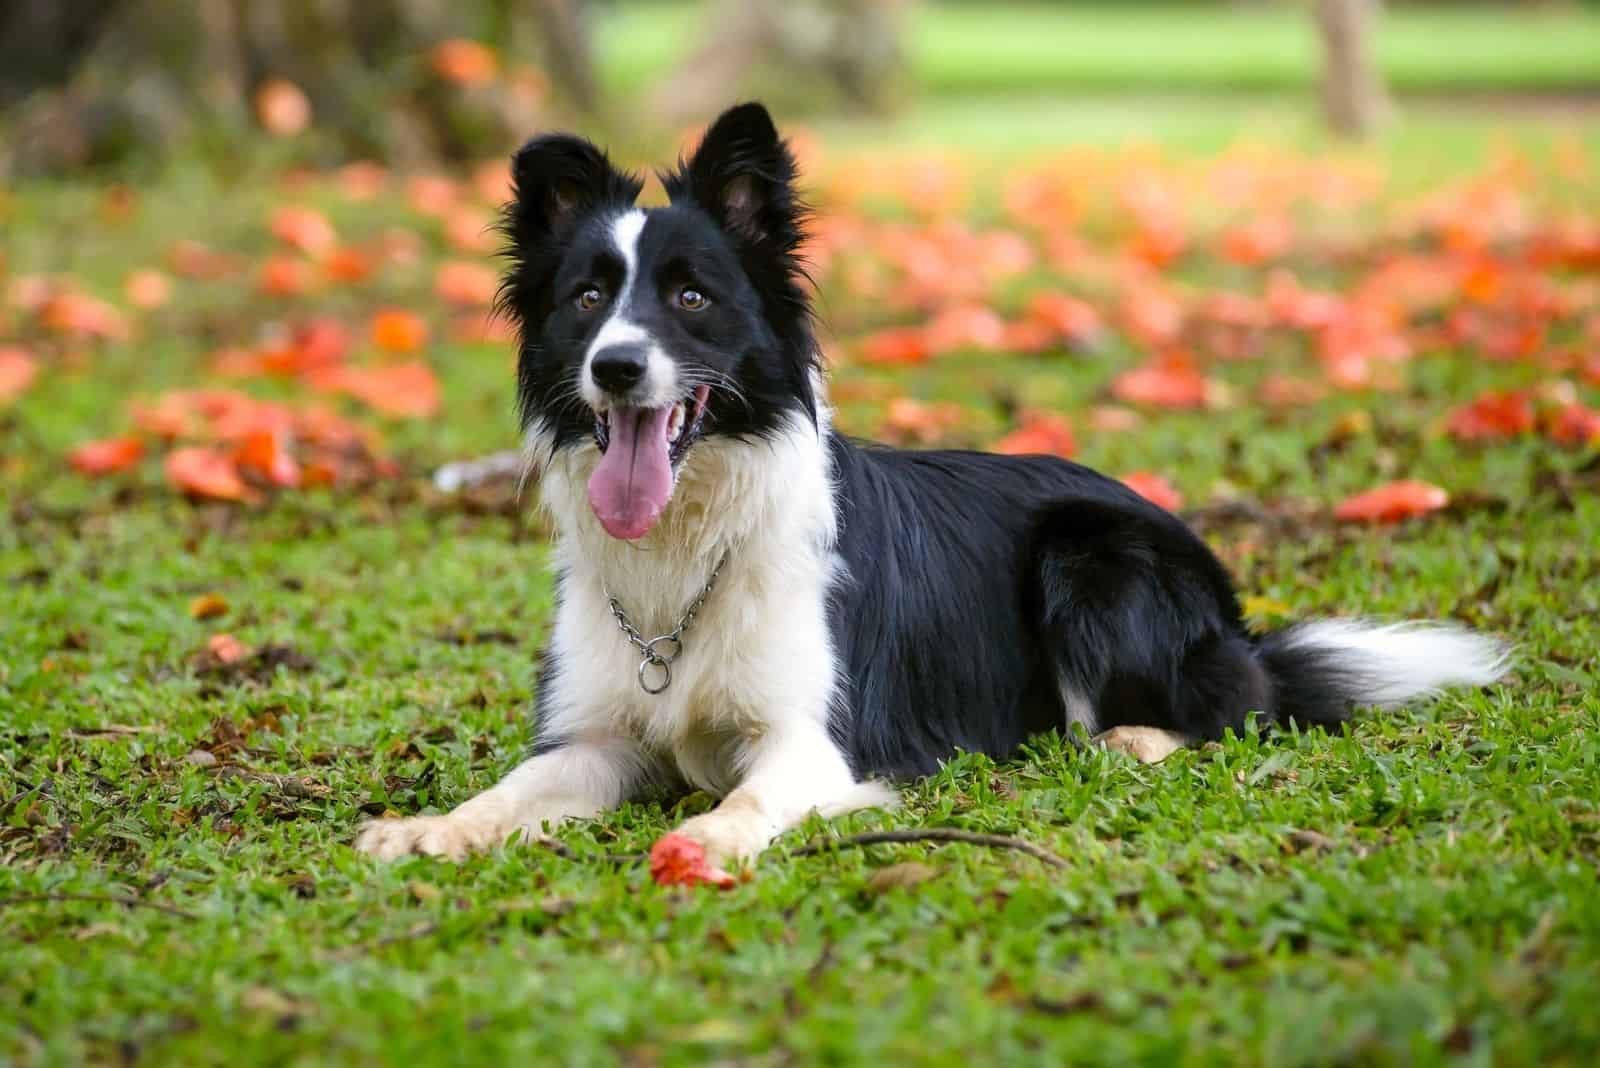 Do Border Collies Shed? Grooming Advice For Collie Owners